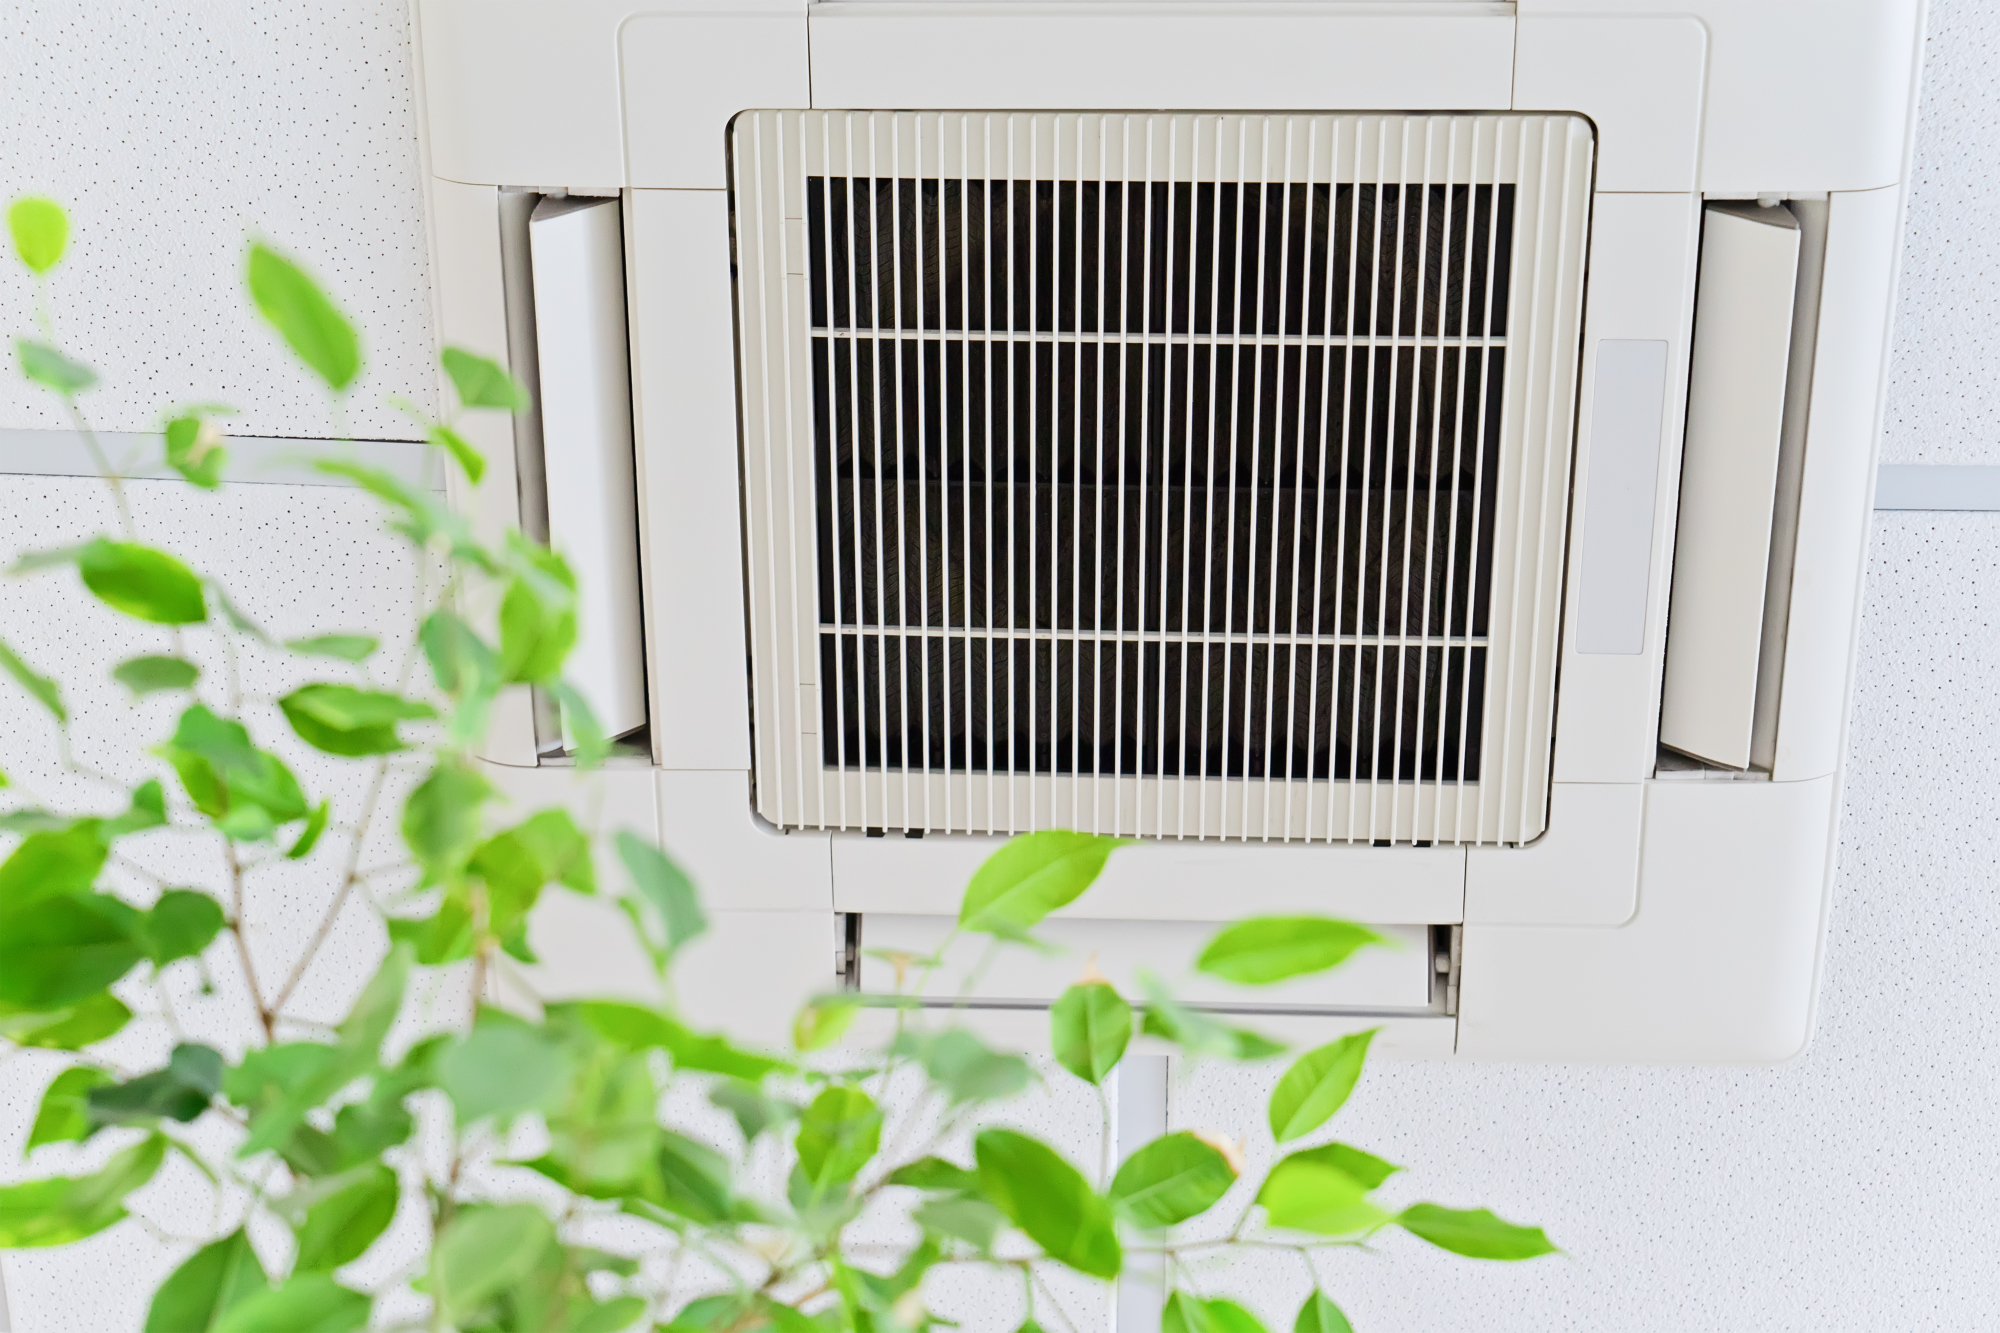 An image of an air conditioning vent with a plant in the foreground